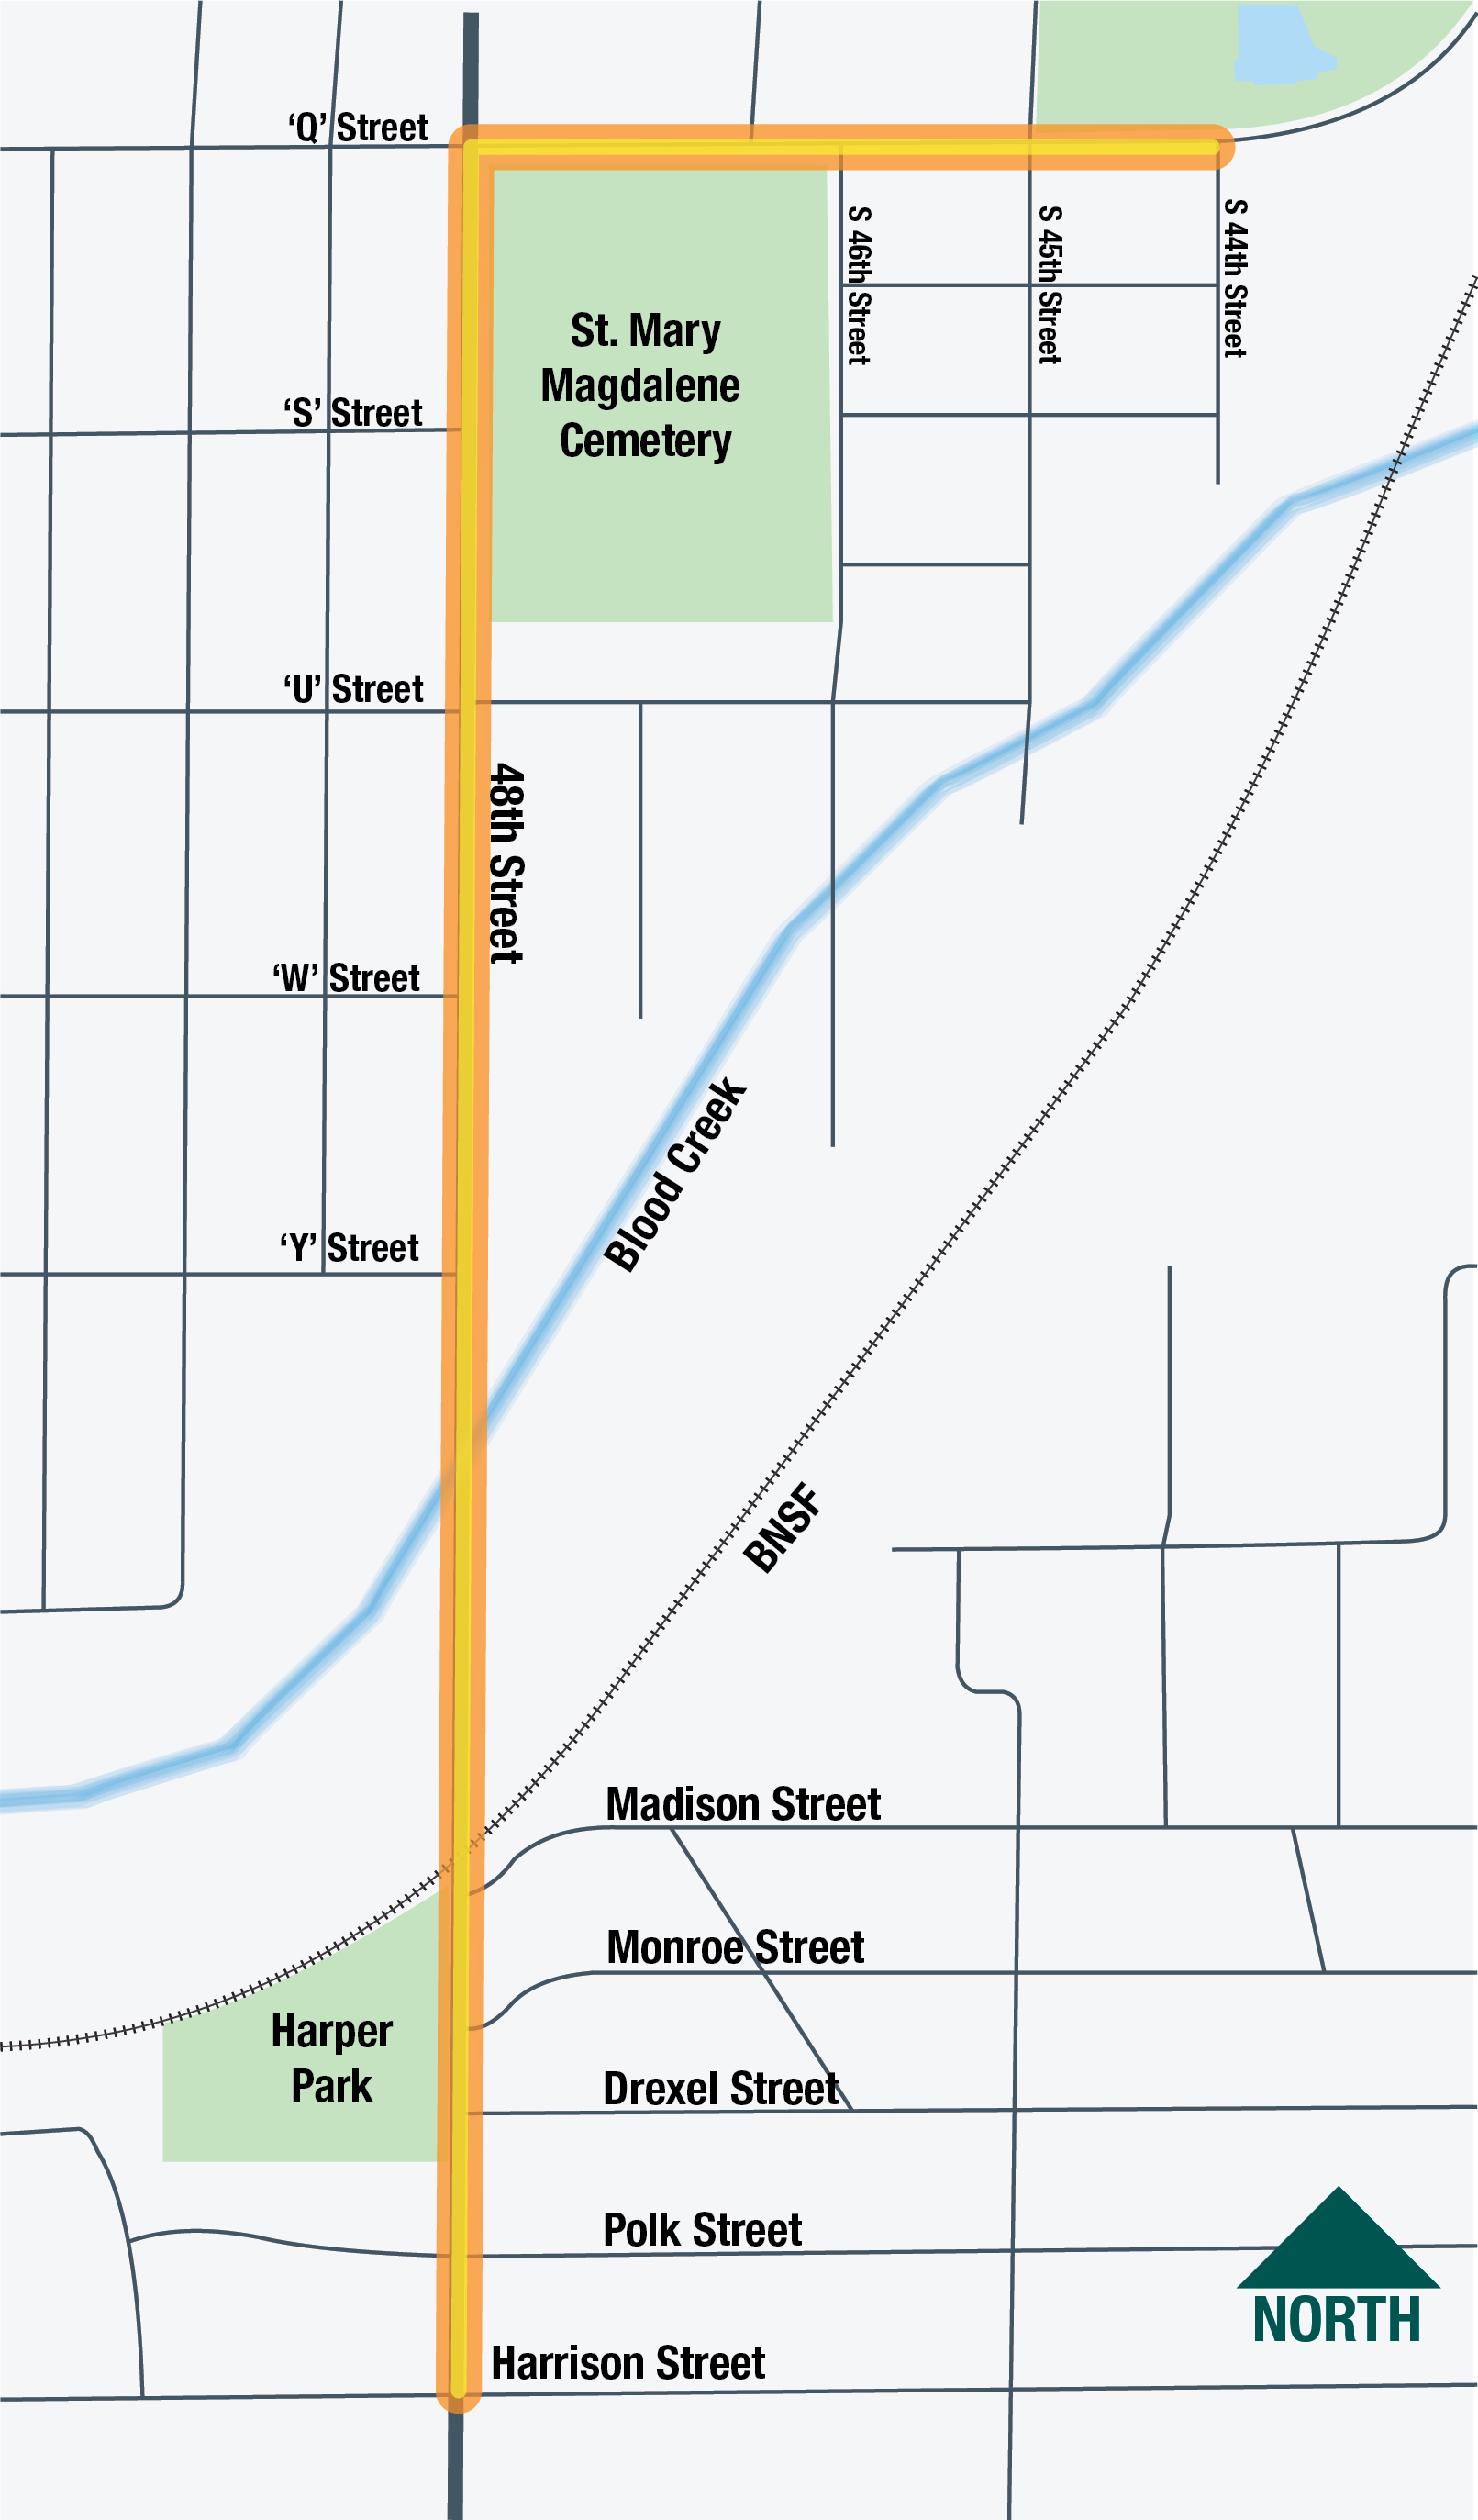 Map showing project location: Q Street from S 4th to 48th Street; 48th Street from Q to Harrison Street.